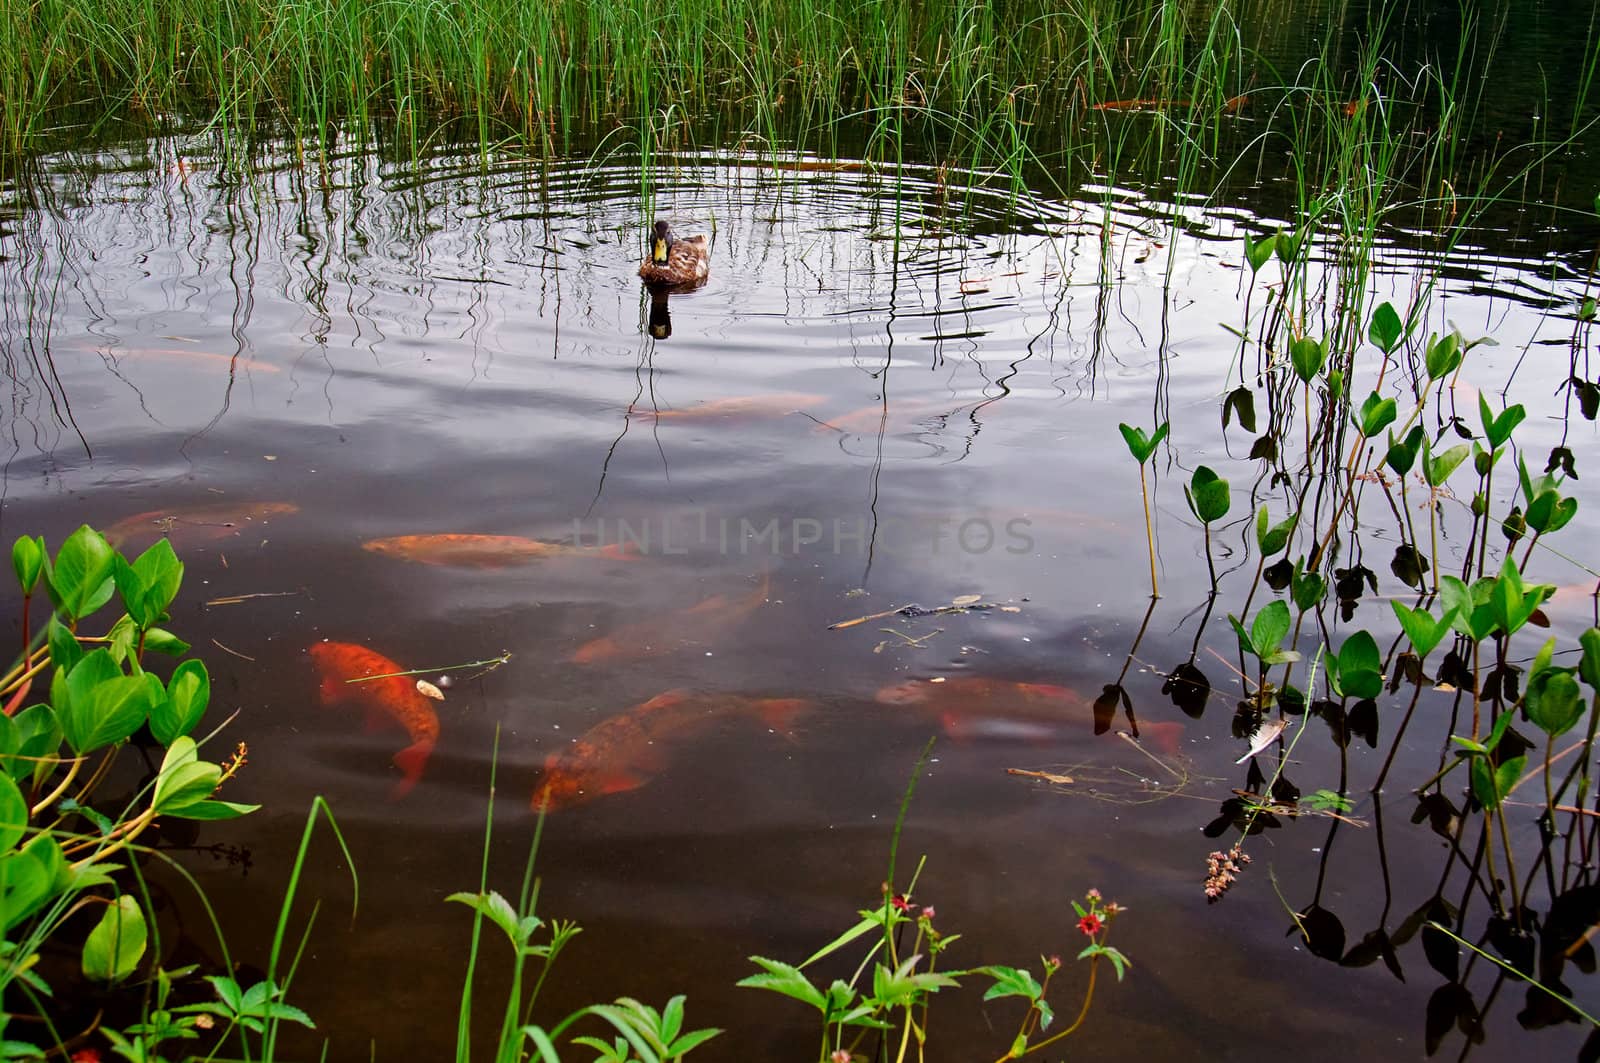 A natural fish pond with goldfishes and a duck